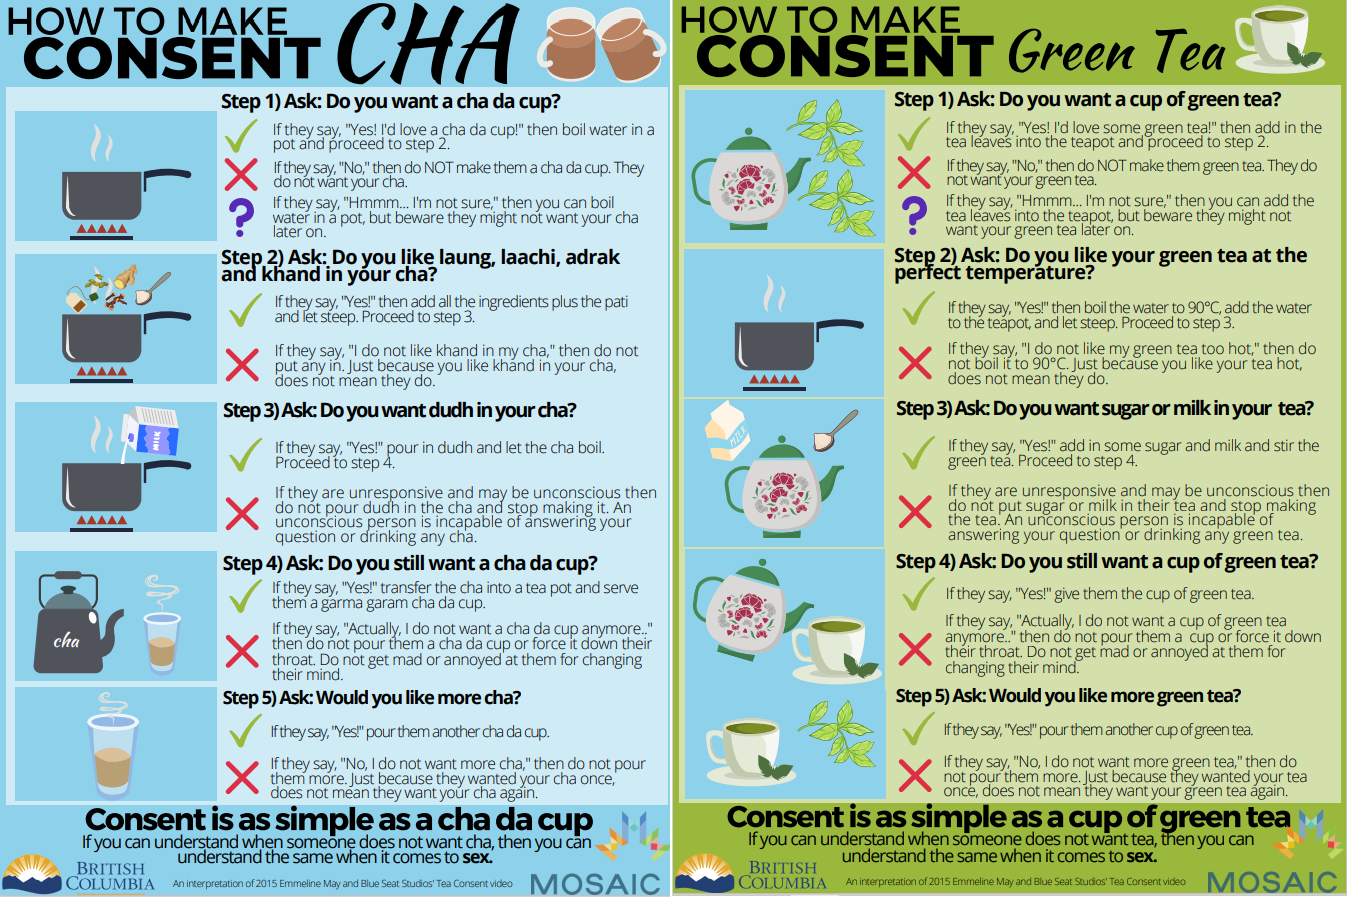 A screenshot of the consent cha handout. Download the following PDF for the full text.